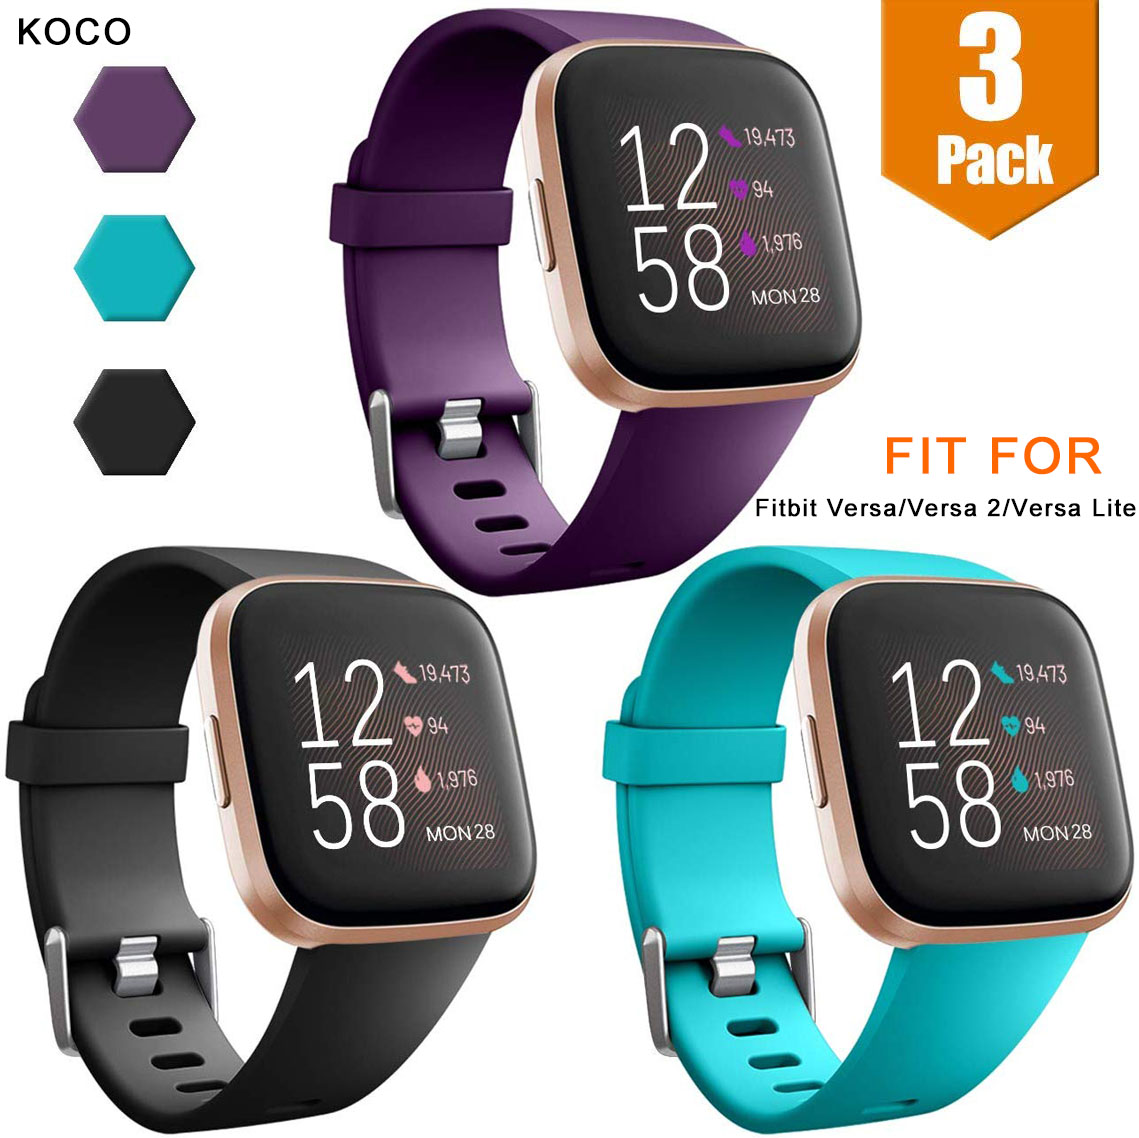 Soft Silicone Sport Strap Replacement Wristband with Ventilation Holes for Fitbit Versa Fitbit Versa Lite for Women and Men Coperr 4 Packs Bands Compatible with Fitbit Versa/Fitbit Versa 2 